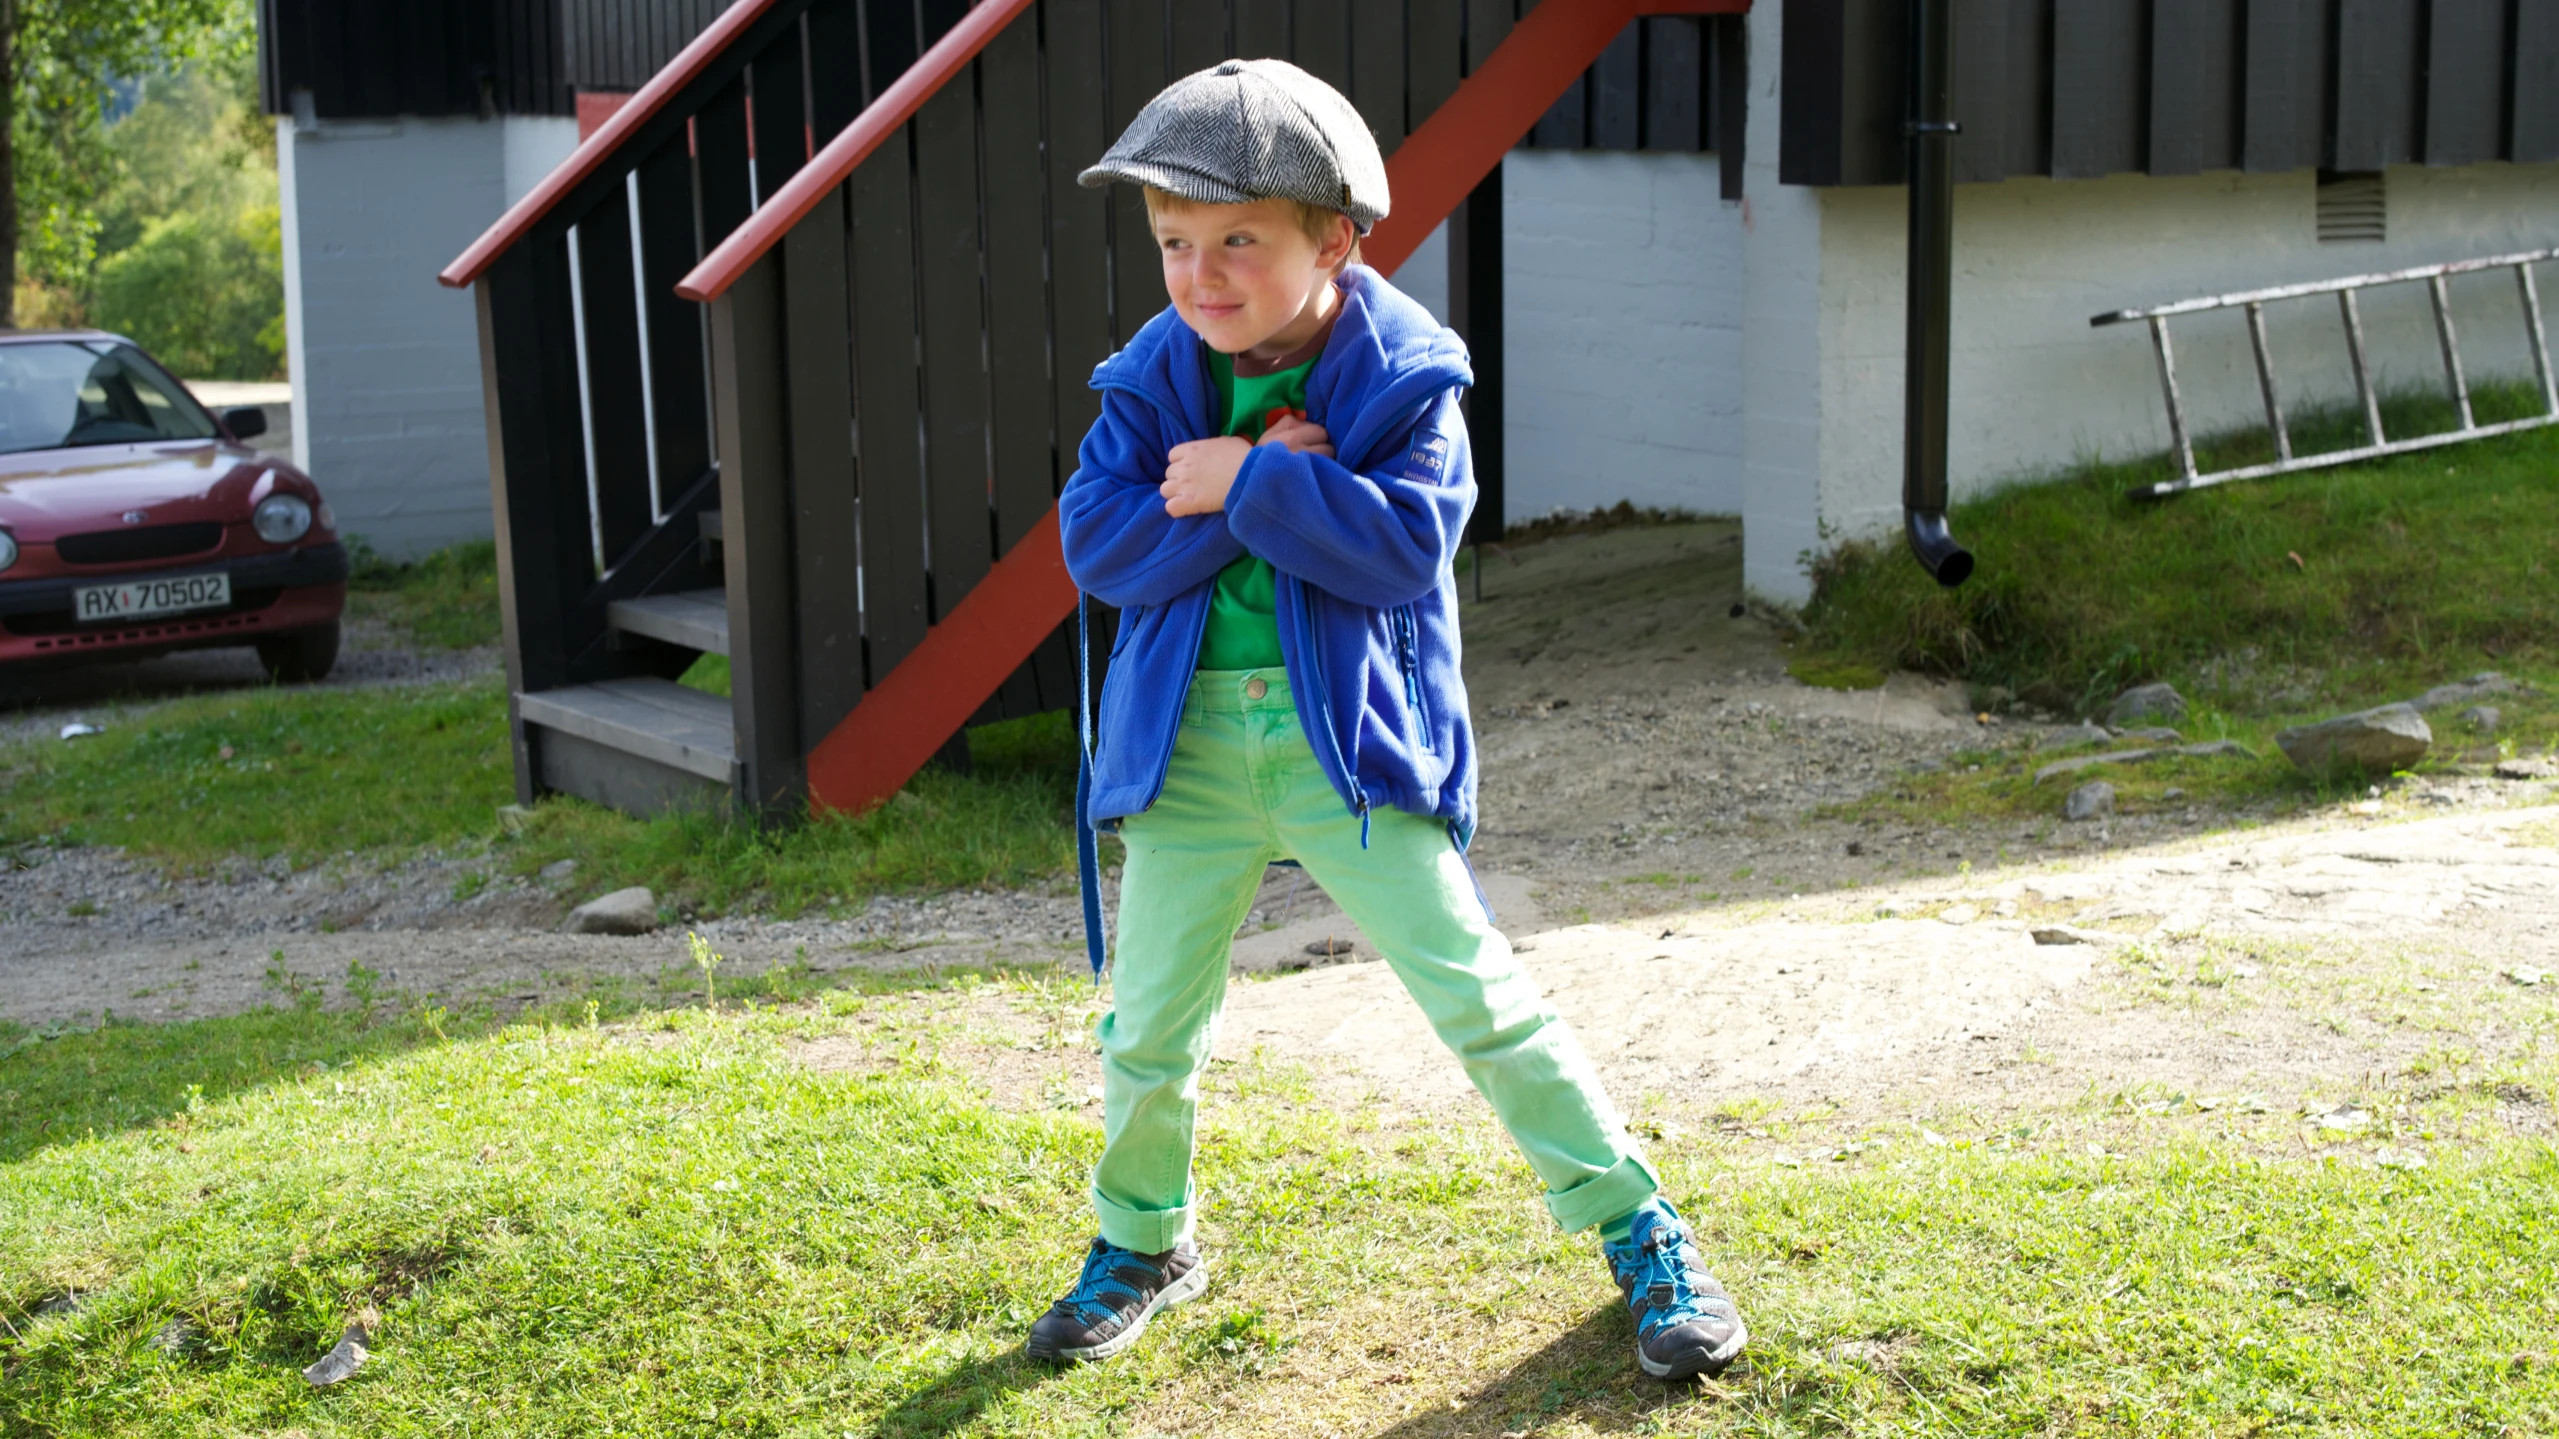 a  poses for the camera wearing green pants and a blue jacket